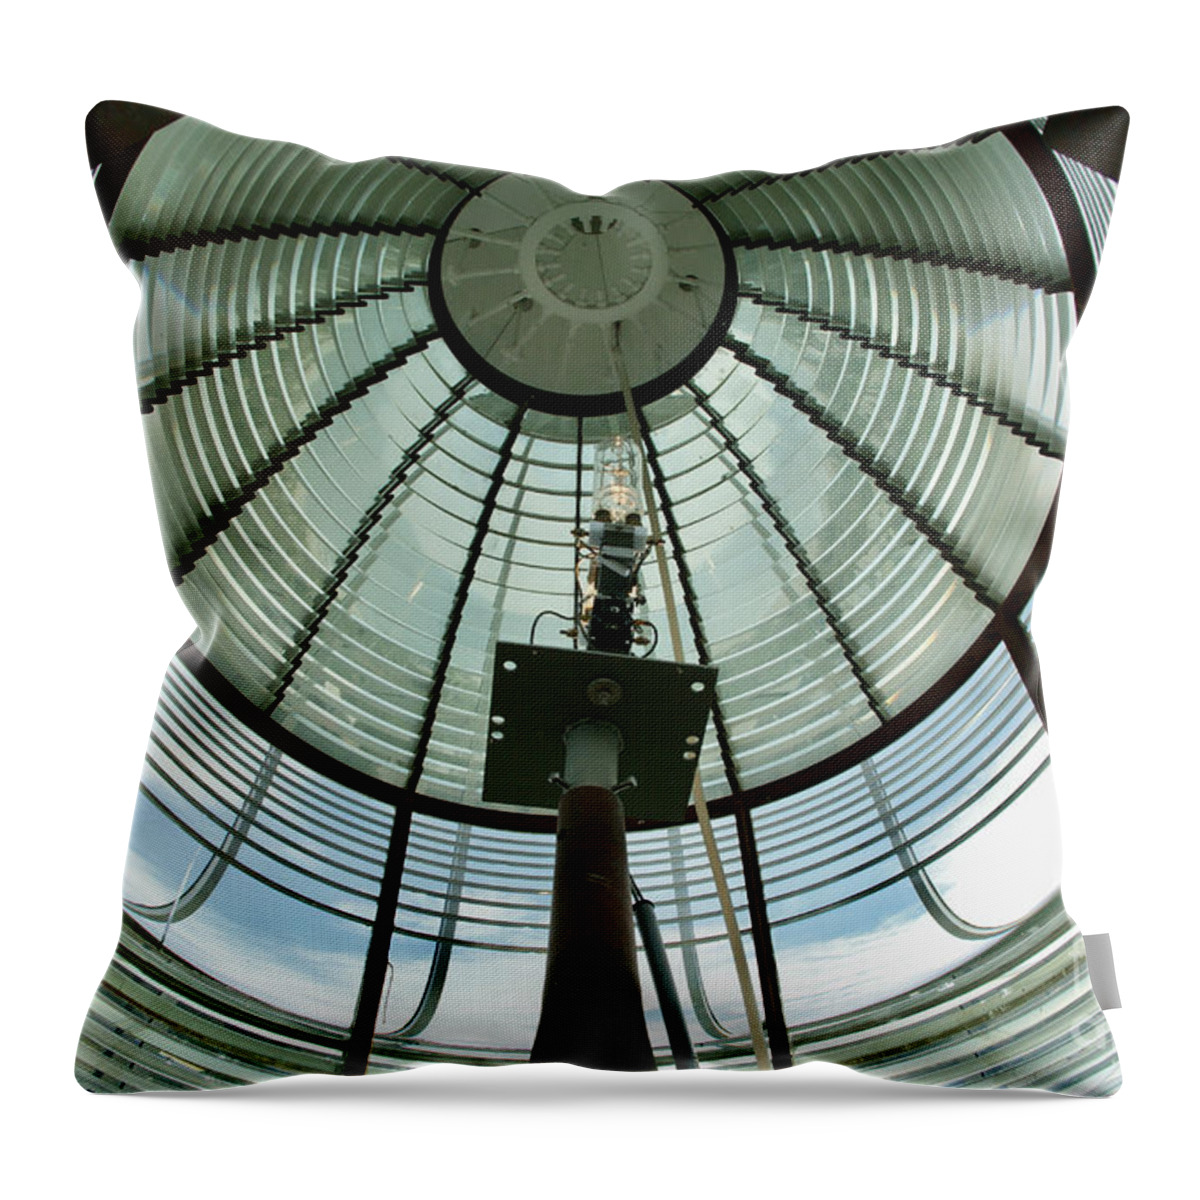  Throw Pillow featuring the photograph Tybee Island Lighthouse by Annamaria Frost